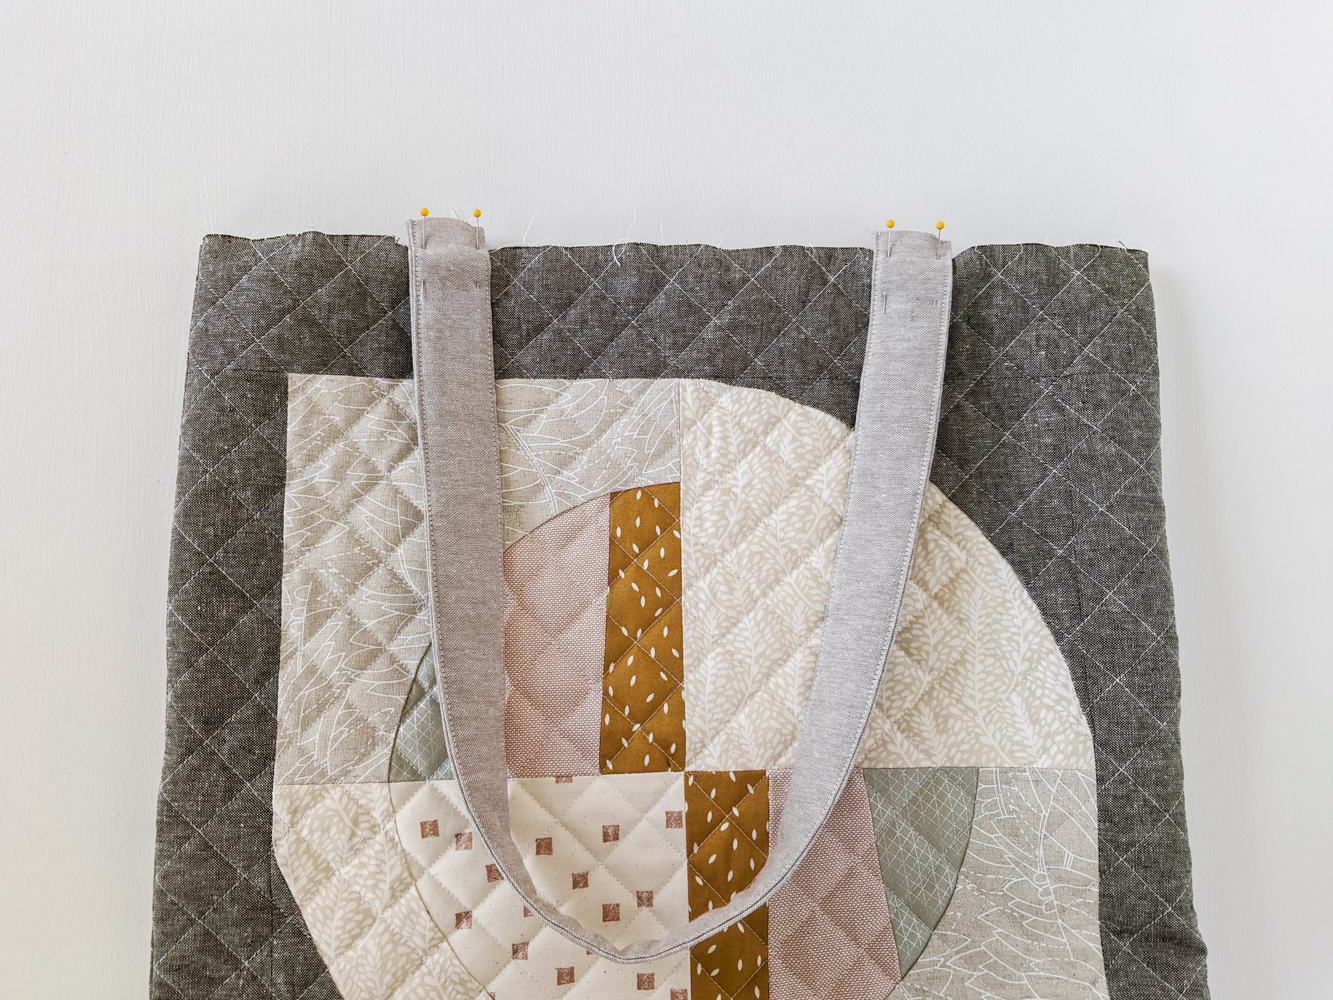 This FREE quilted tote bag tutorial shows step by step how to create a large tote bag using the Modern Fans quilt block pattern. suzyquilts.com #bagtutorial